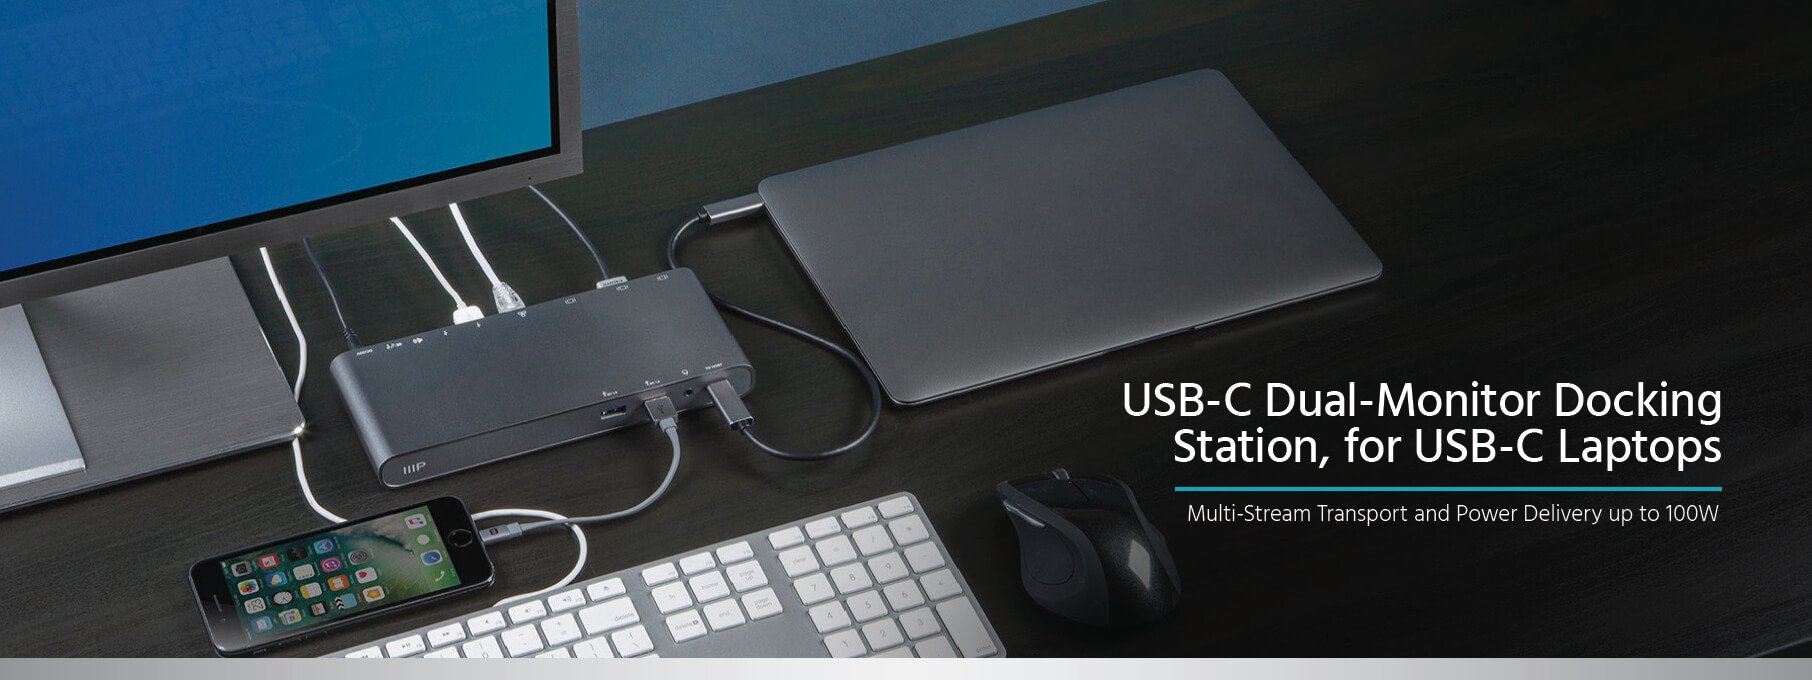 lav lektier Fødested Delegation Monoprice USB-C Dual-Monitor Docking Station for USB-C Laptops, MST, and  Power Delivery up to 100W with USB-C Cable - Monoprice.com